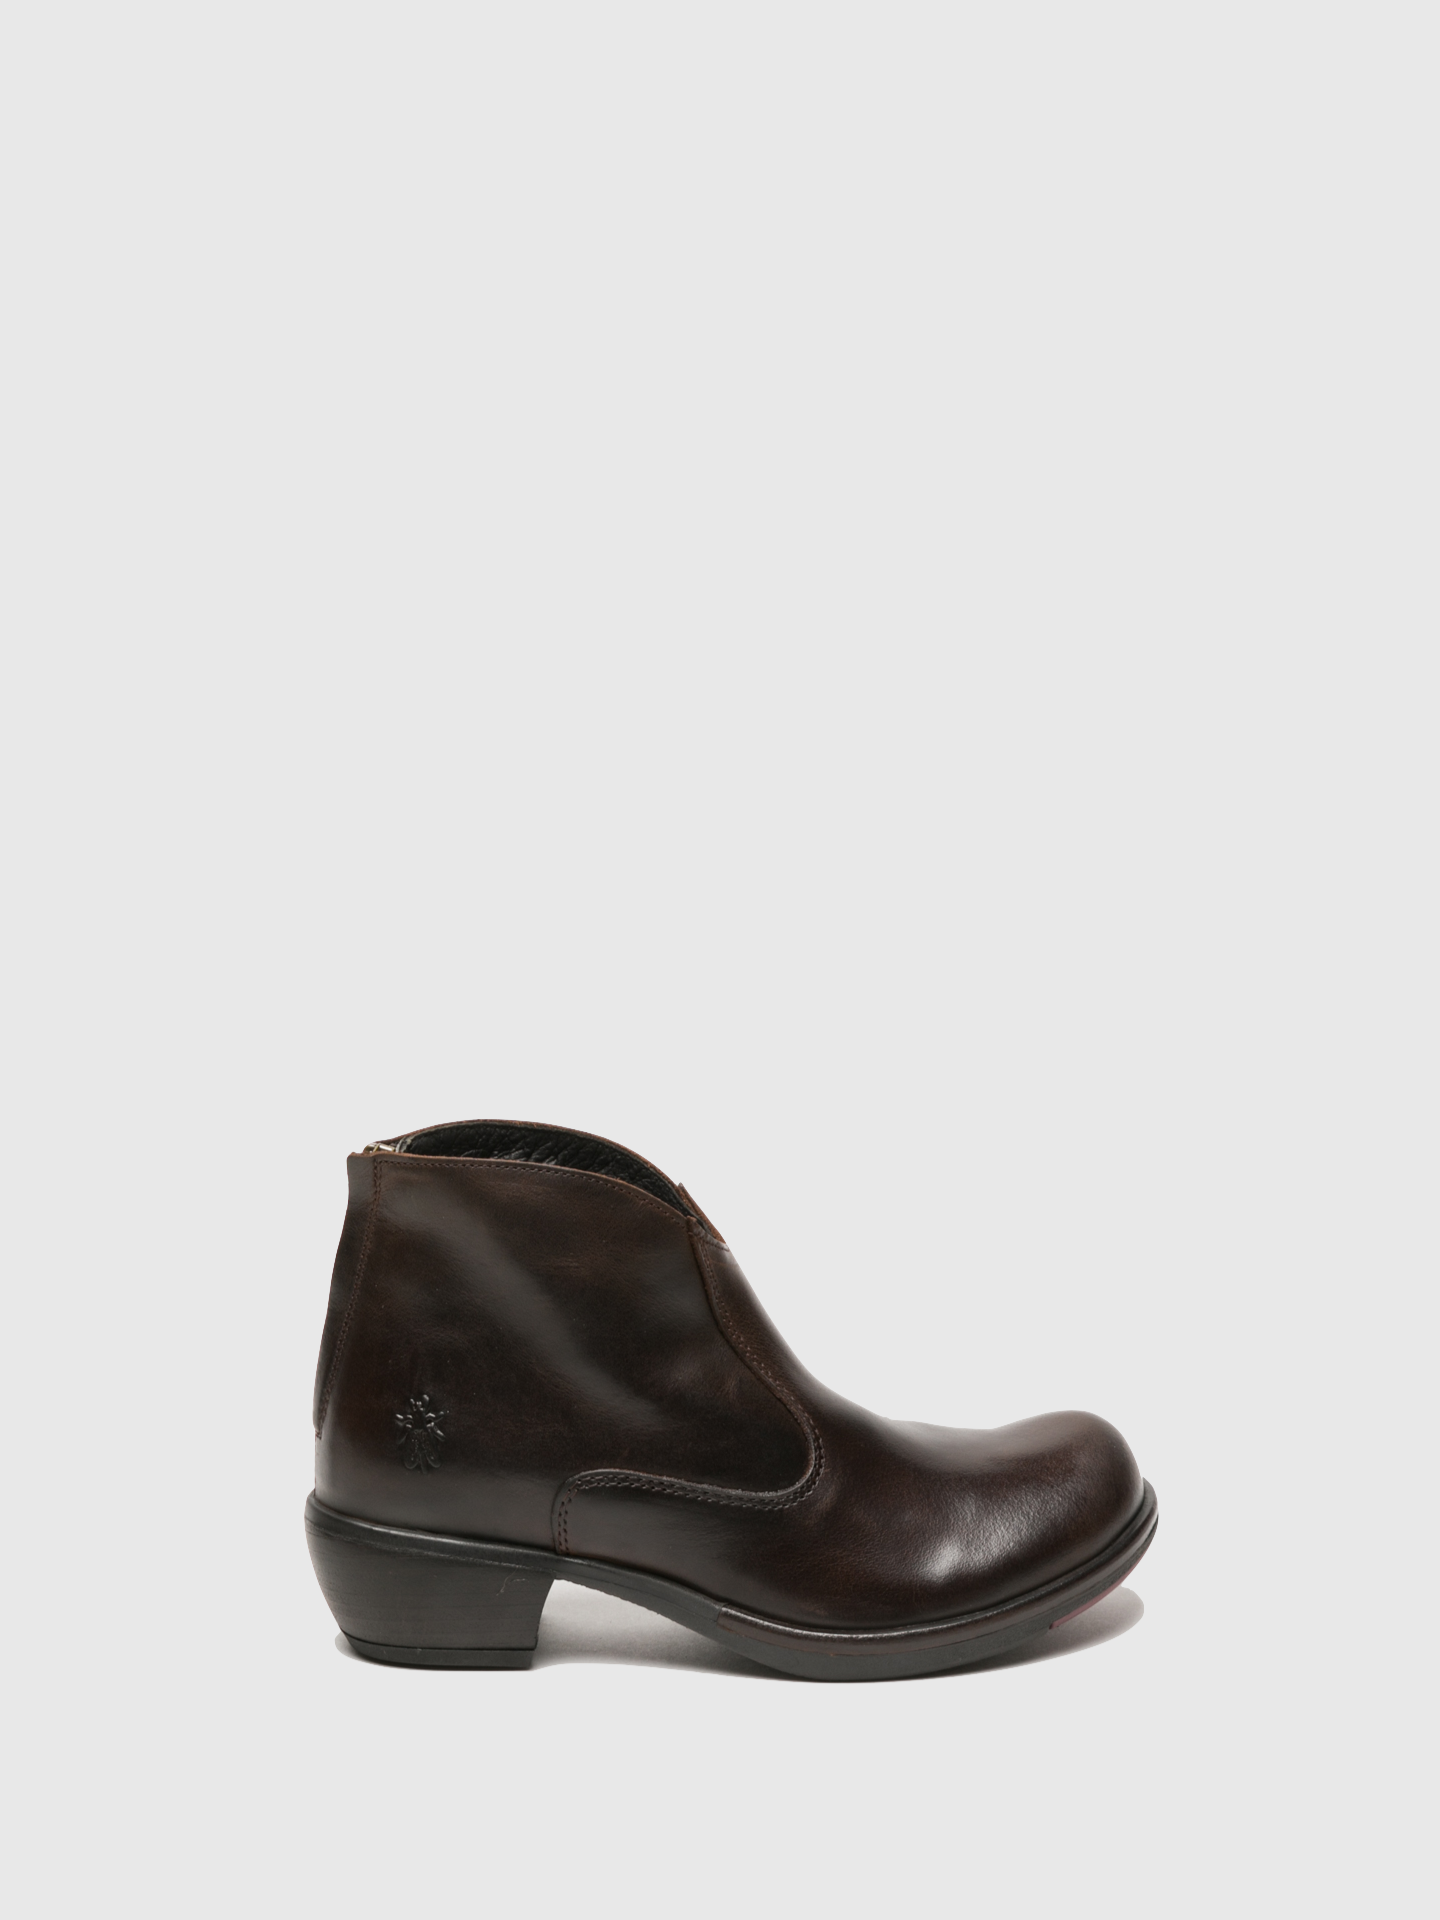 Fly London SaddleBrown Zip Up Ankle Boots